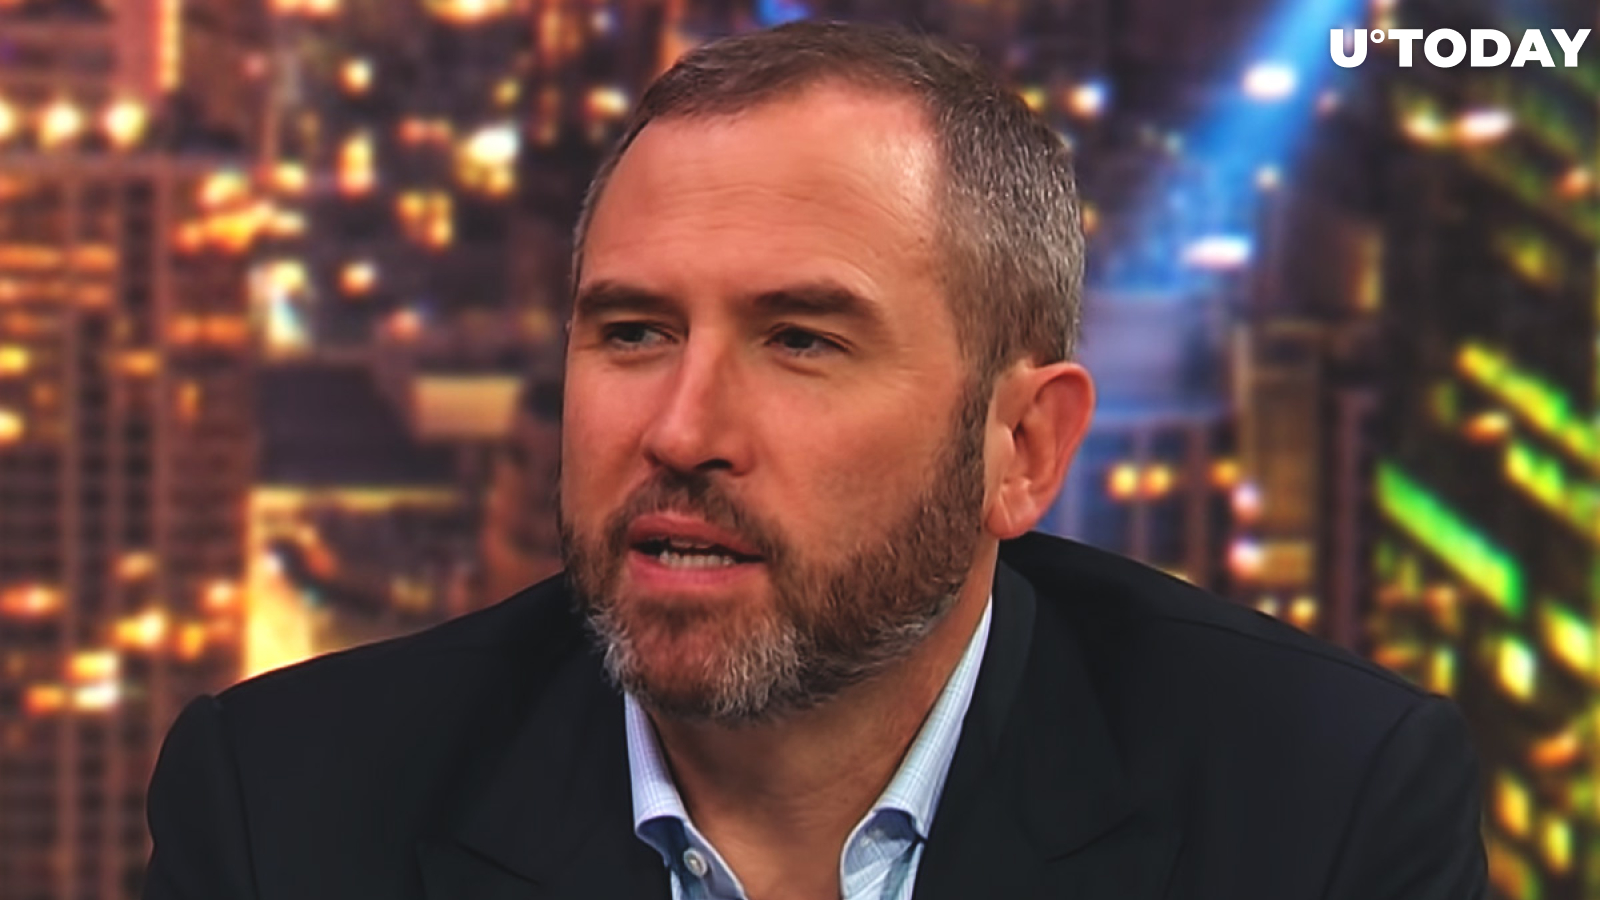 Ripple CEO: Gensler's 'Pro-Innovation' Stance Is a Farce